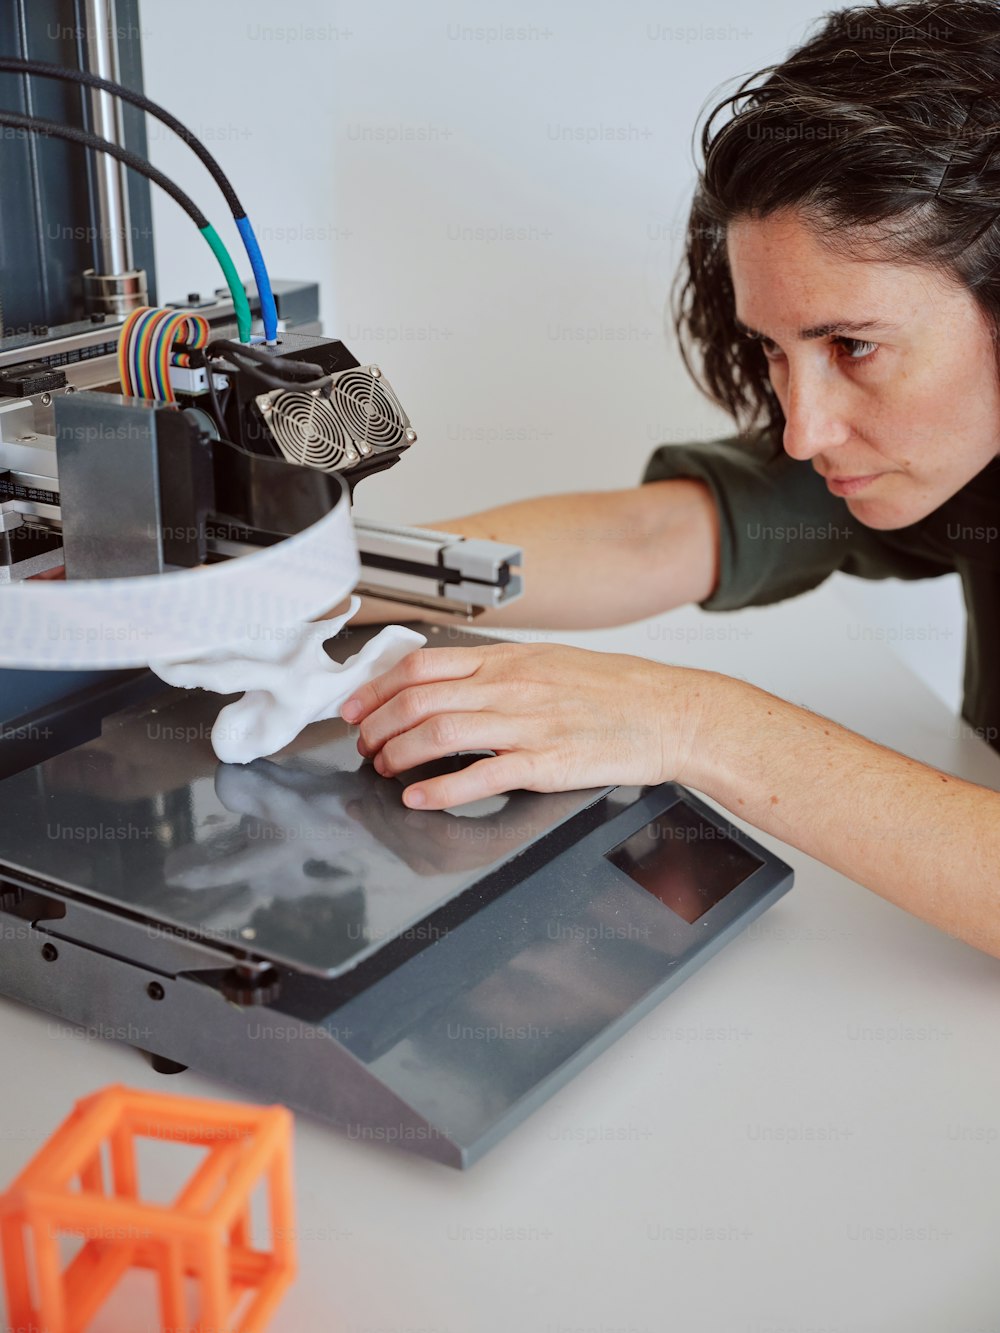 a woman is working on a 3d printer